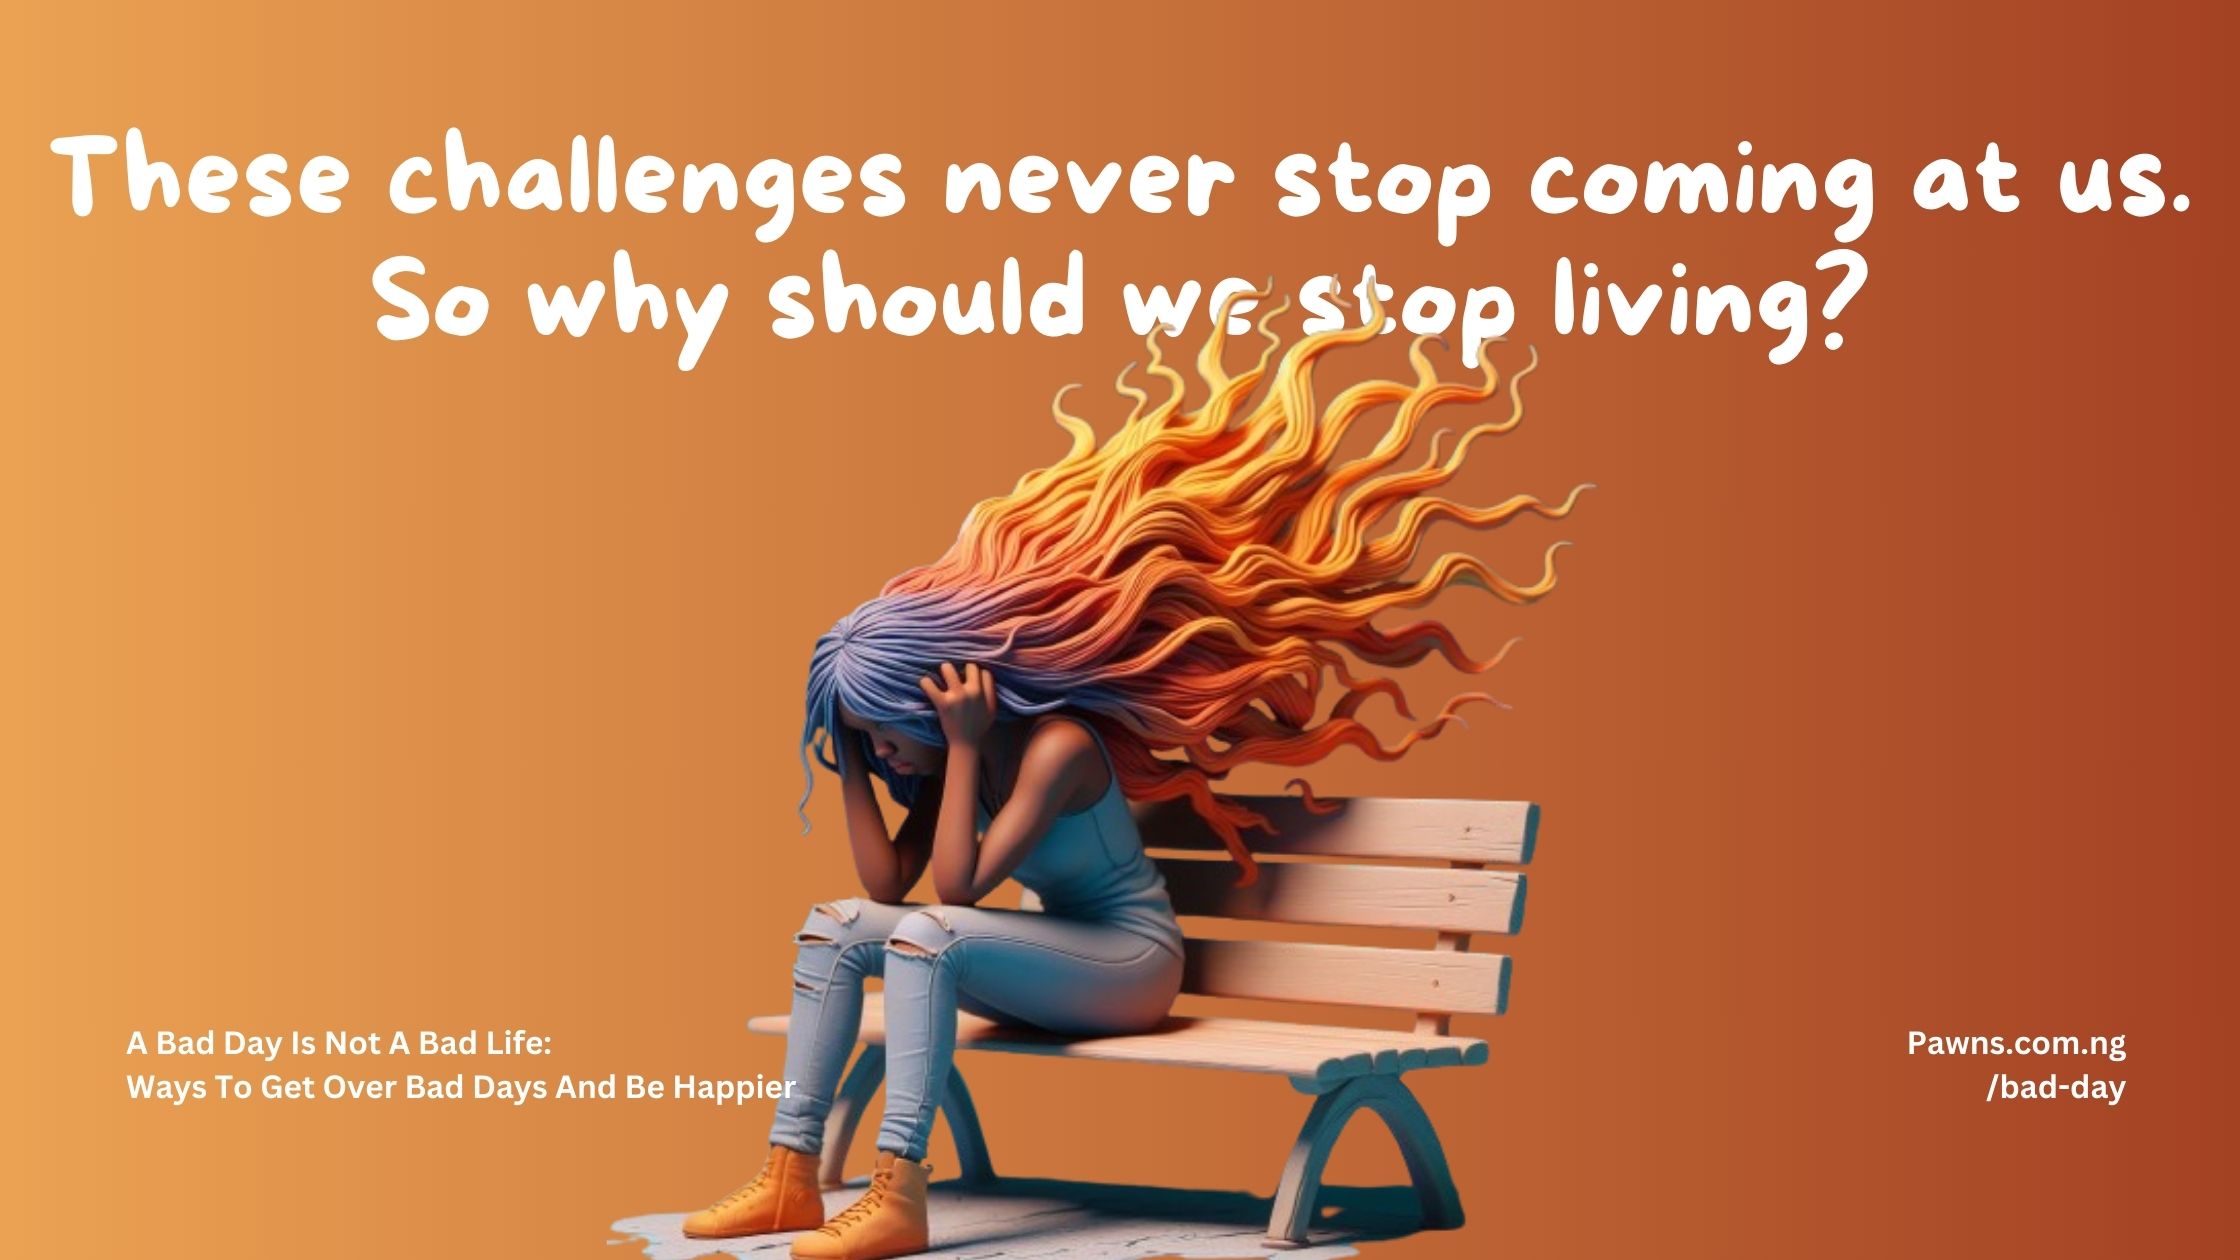 These challenges never stop coming at us. So why should we stop living A Bad Day Is Not A Bad Life Ways To Get Over Bad Days And Be Happier